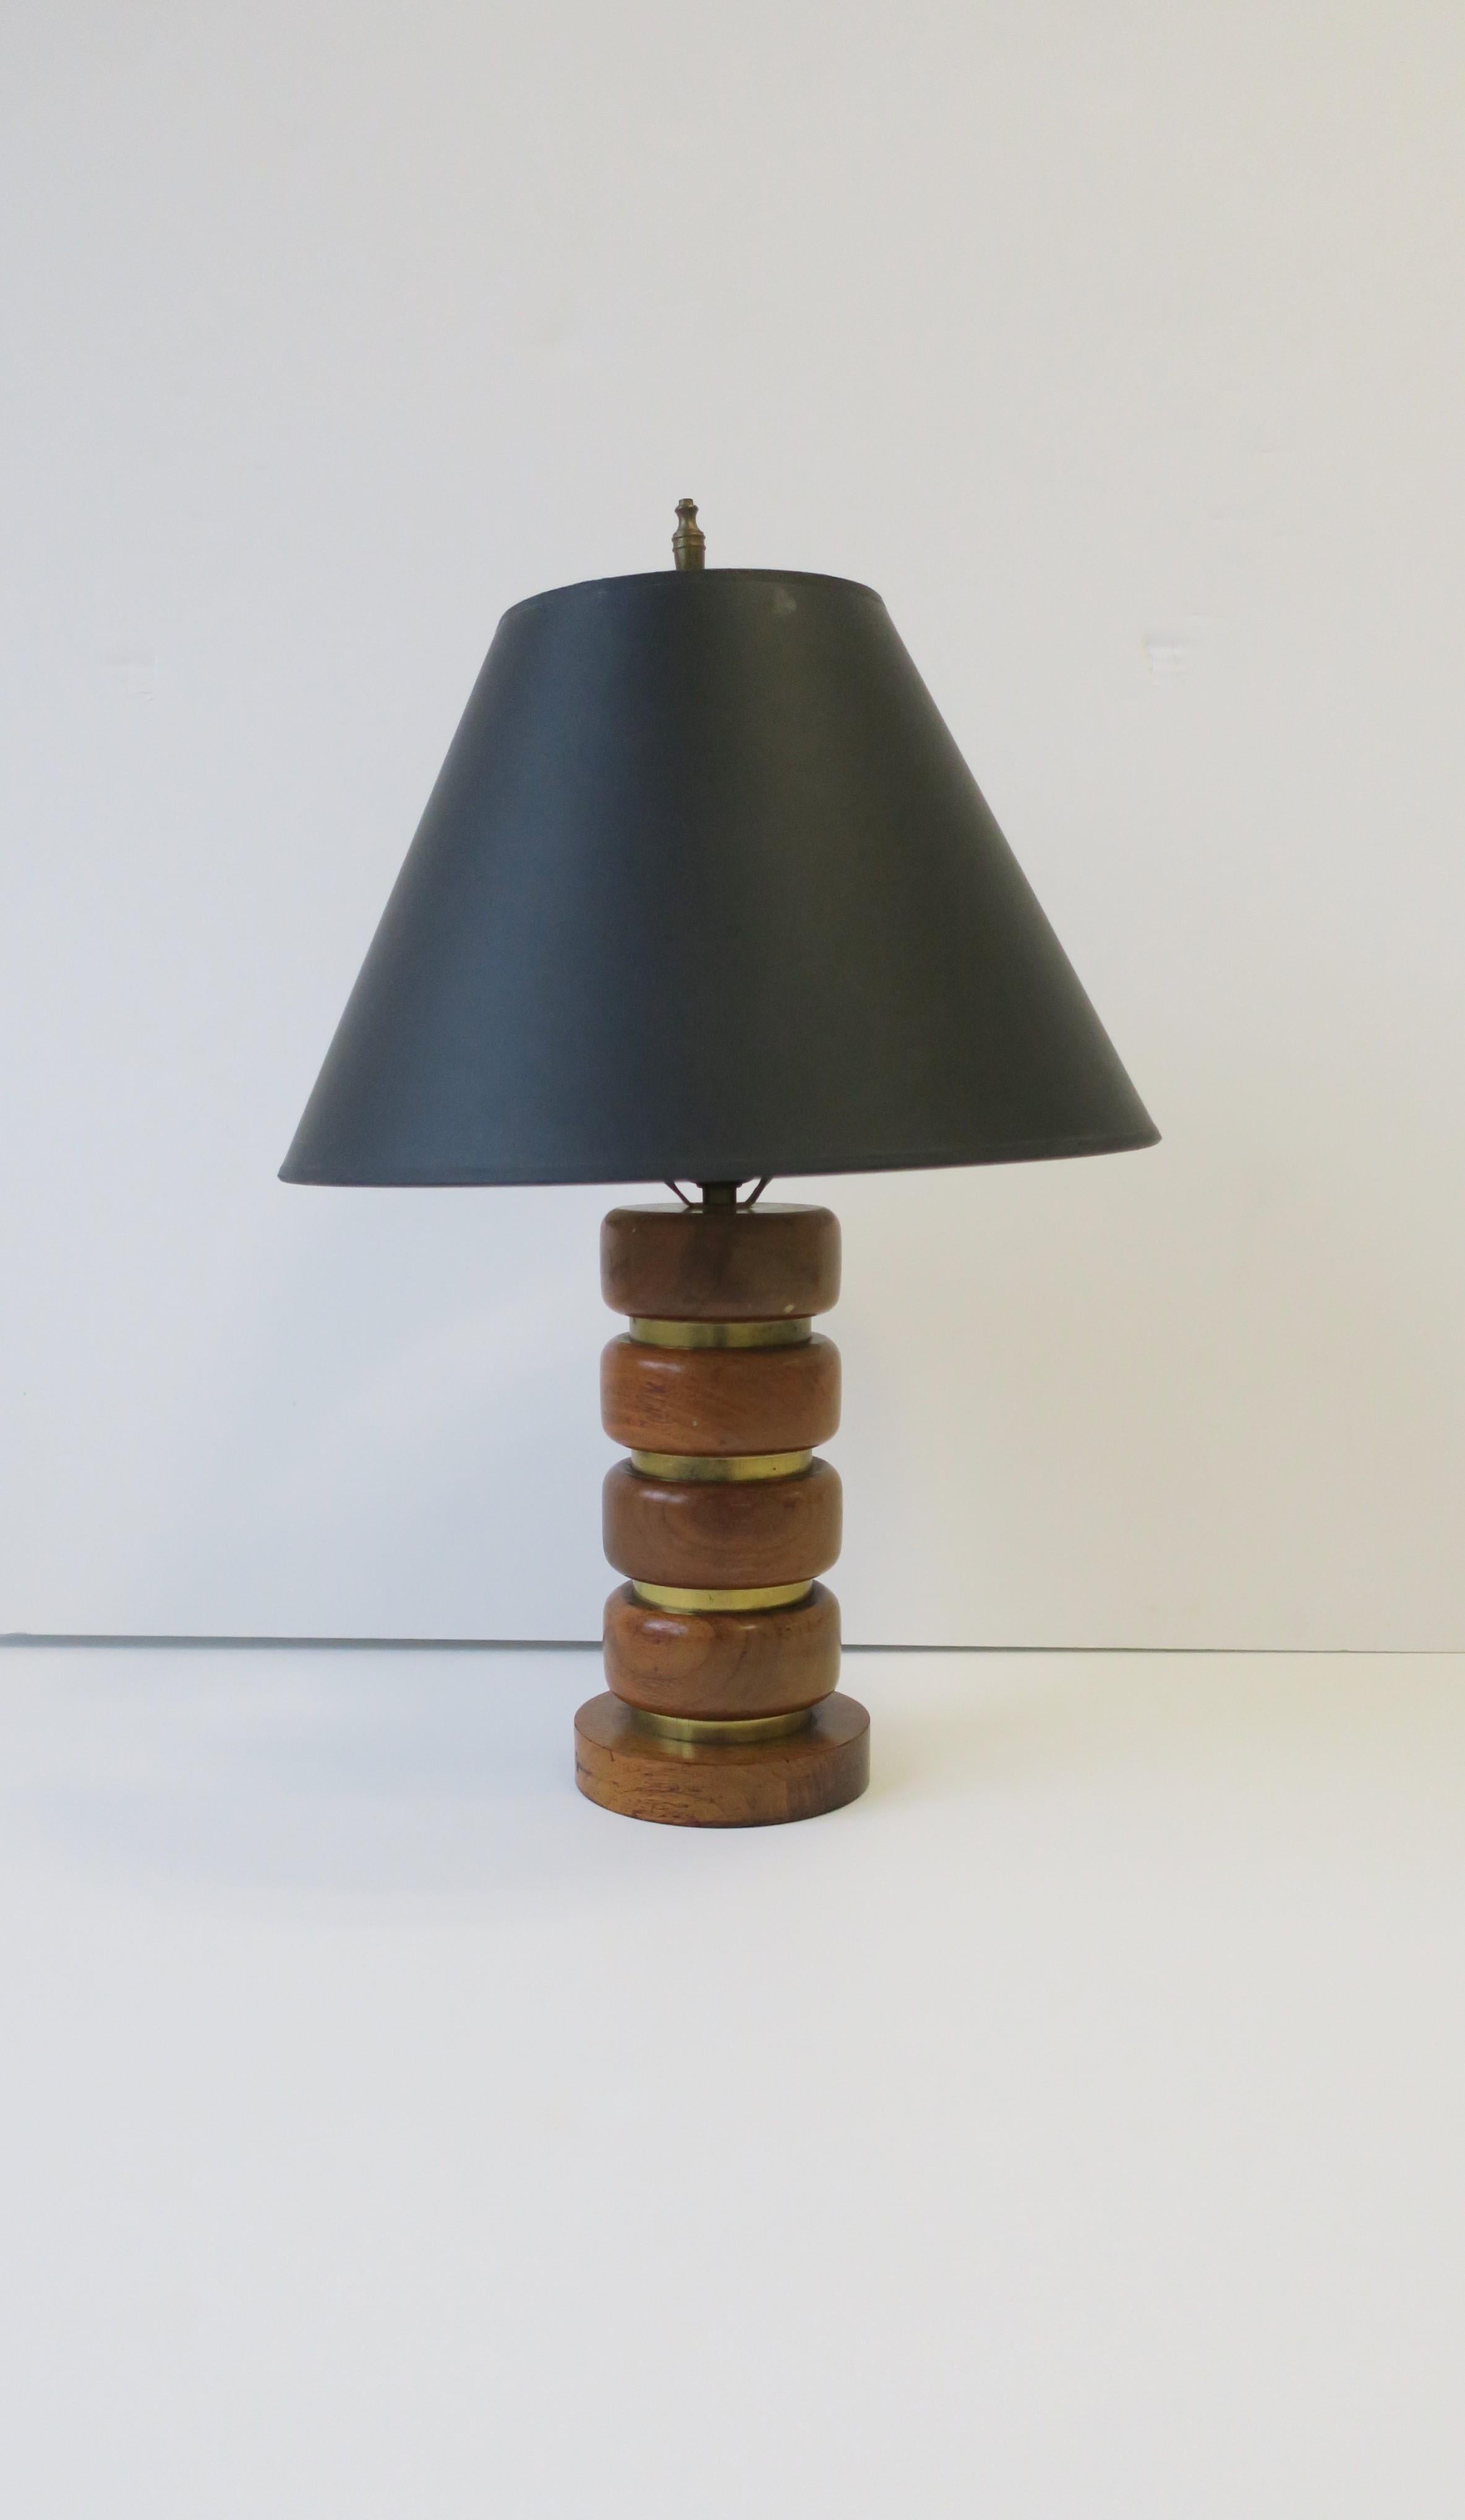 A Midcentury Modern walnut wood and brass desk or table lamp, circa mid-20th century. Lamp is turned wood with soft edges and indents of horizontal brass bands. This lamp would make a great desk or table lamp; in a convenient size measuring: 

Lamp